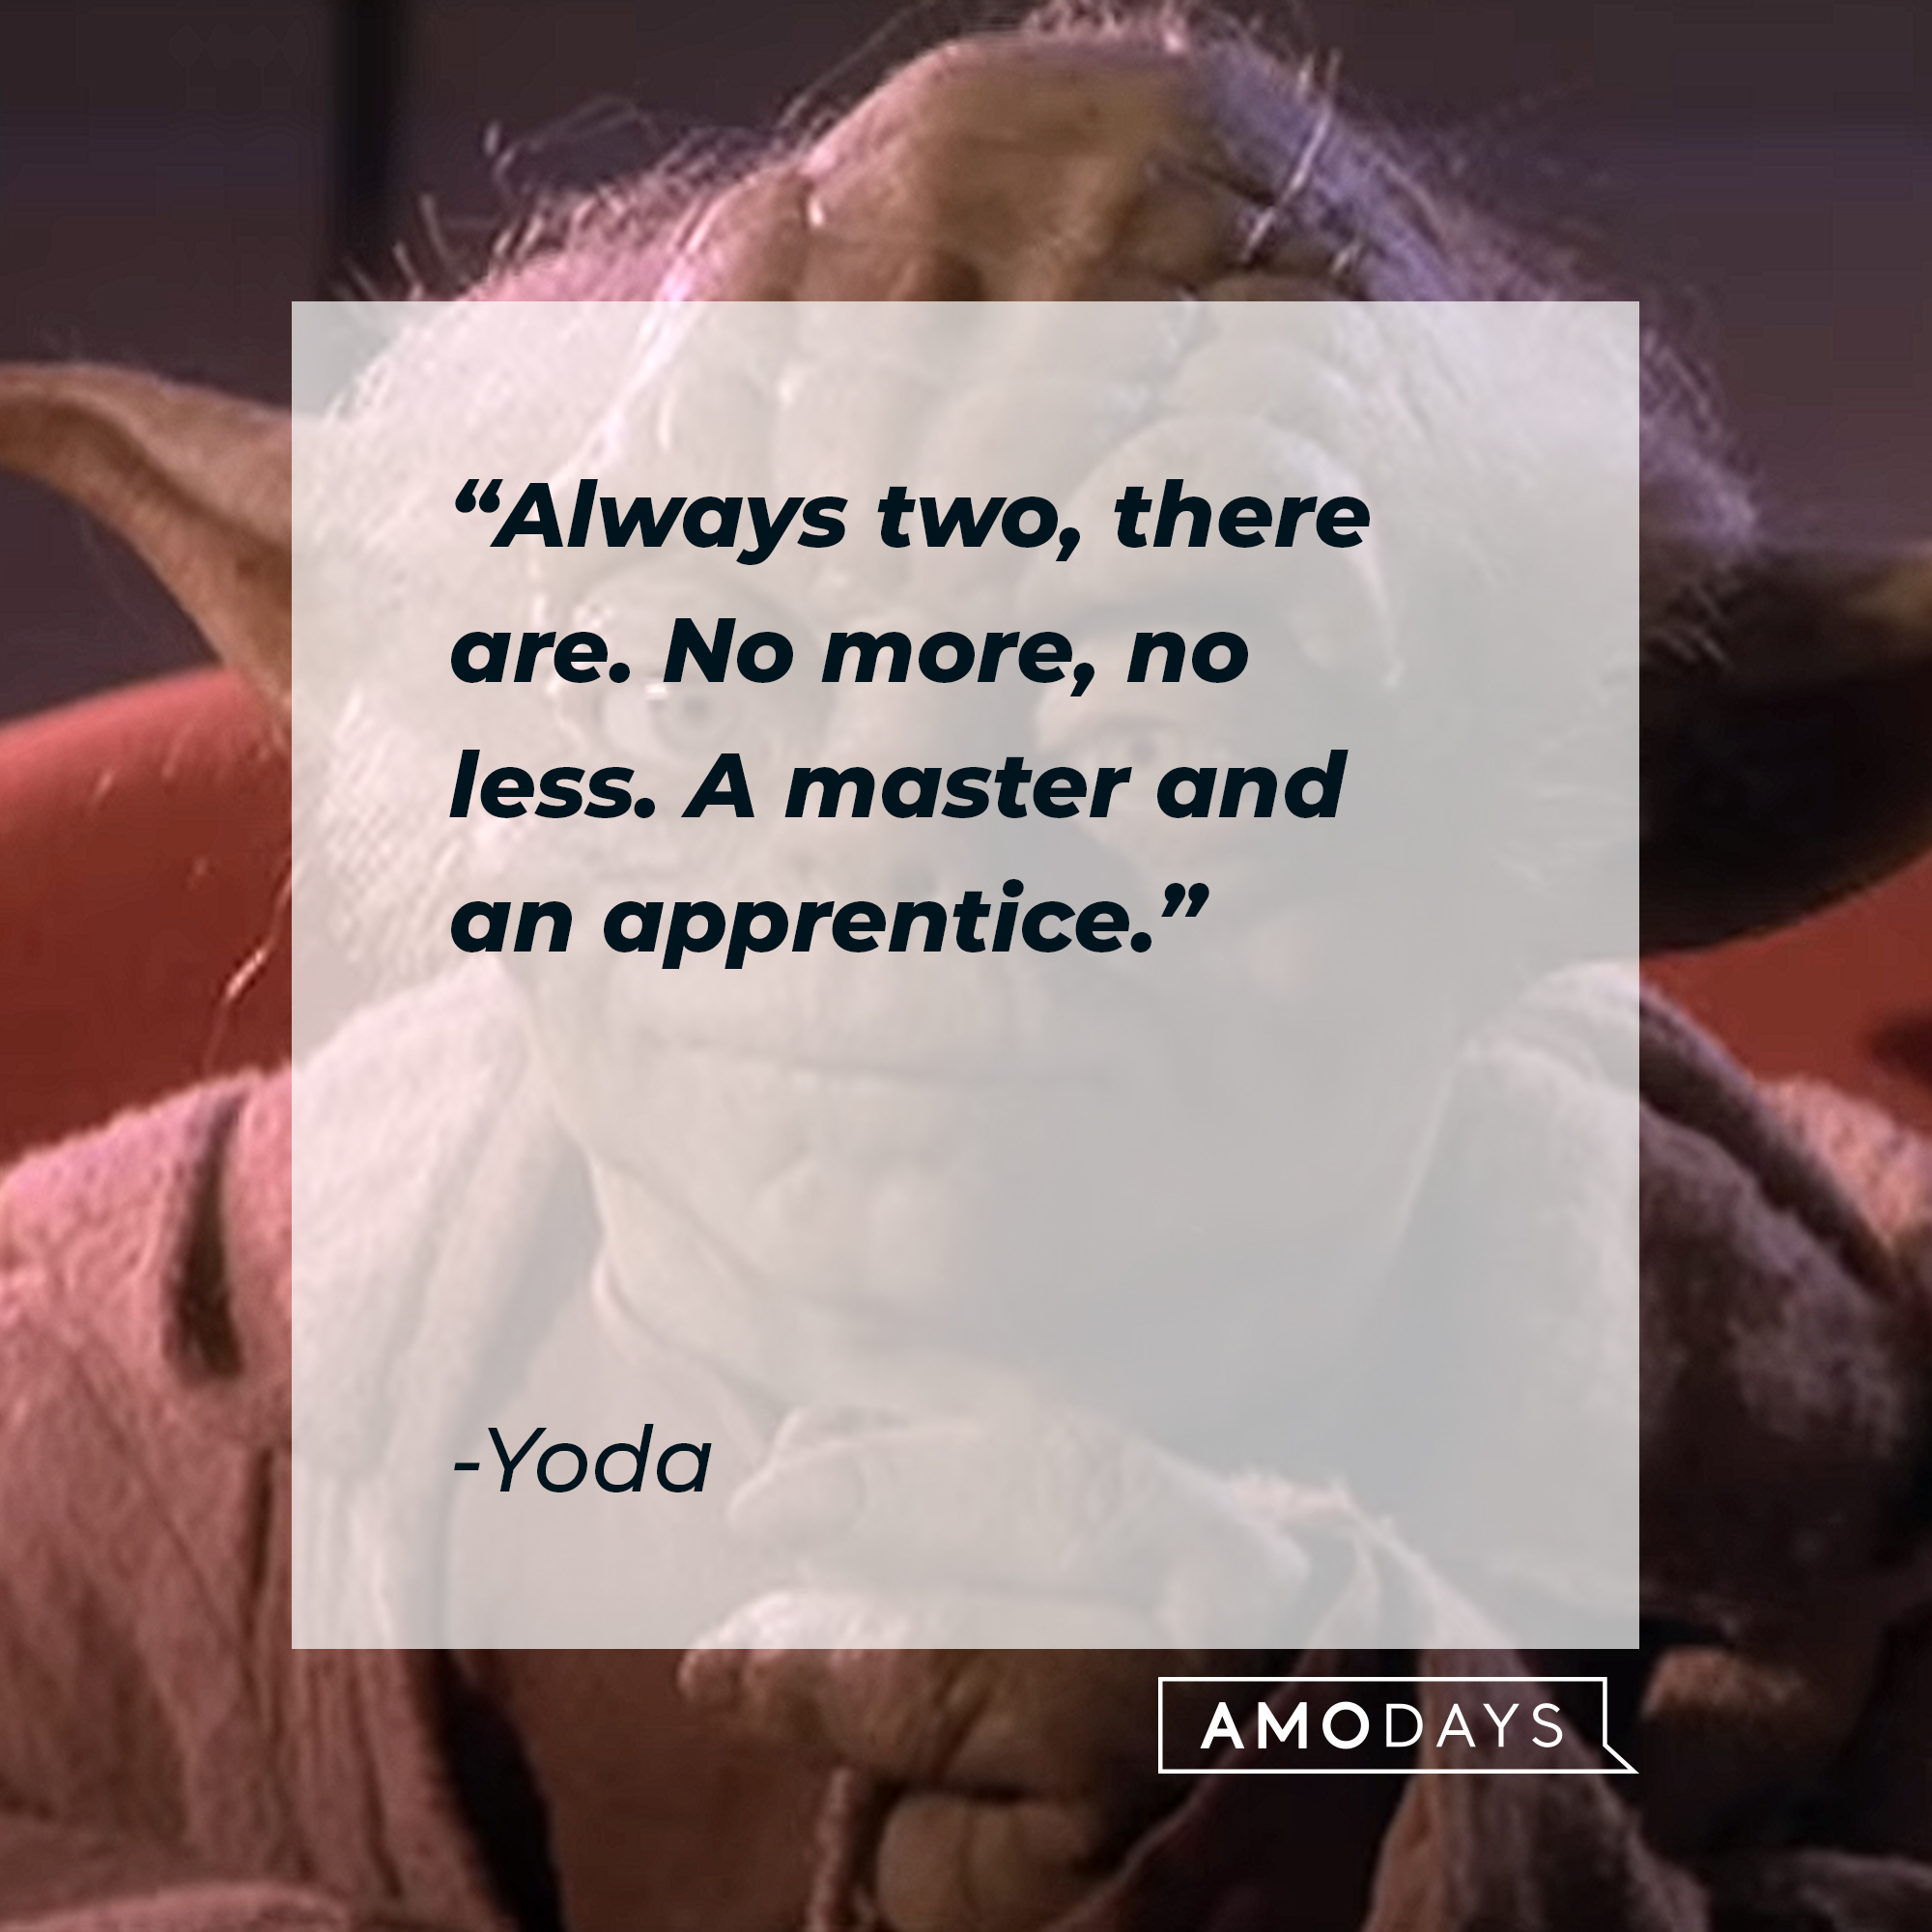 Yoda with his quote: "Always two, there are. No more, no less. A master and an apprentice." | Source: Youtube/StarWars